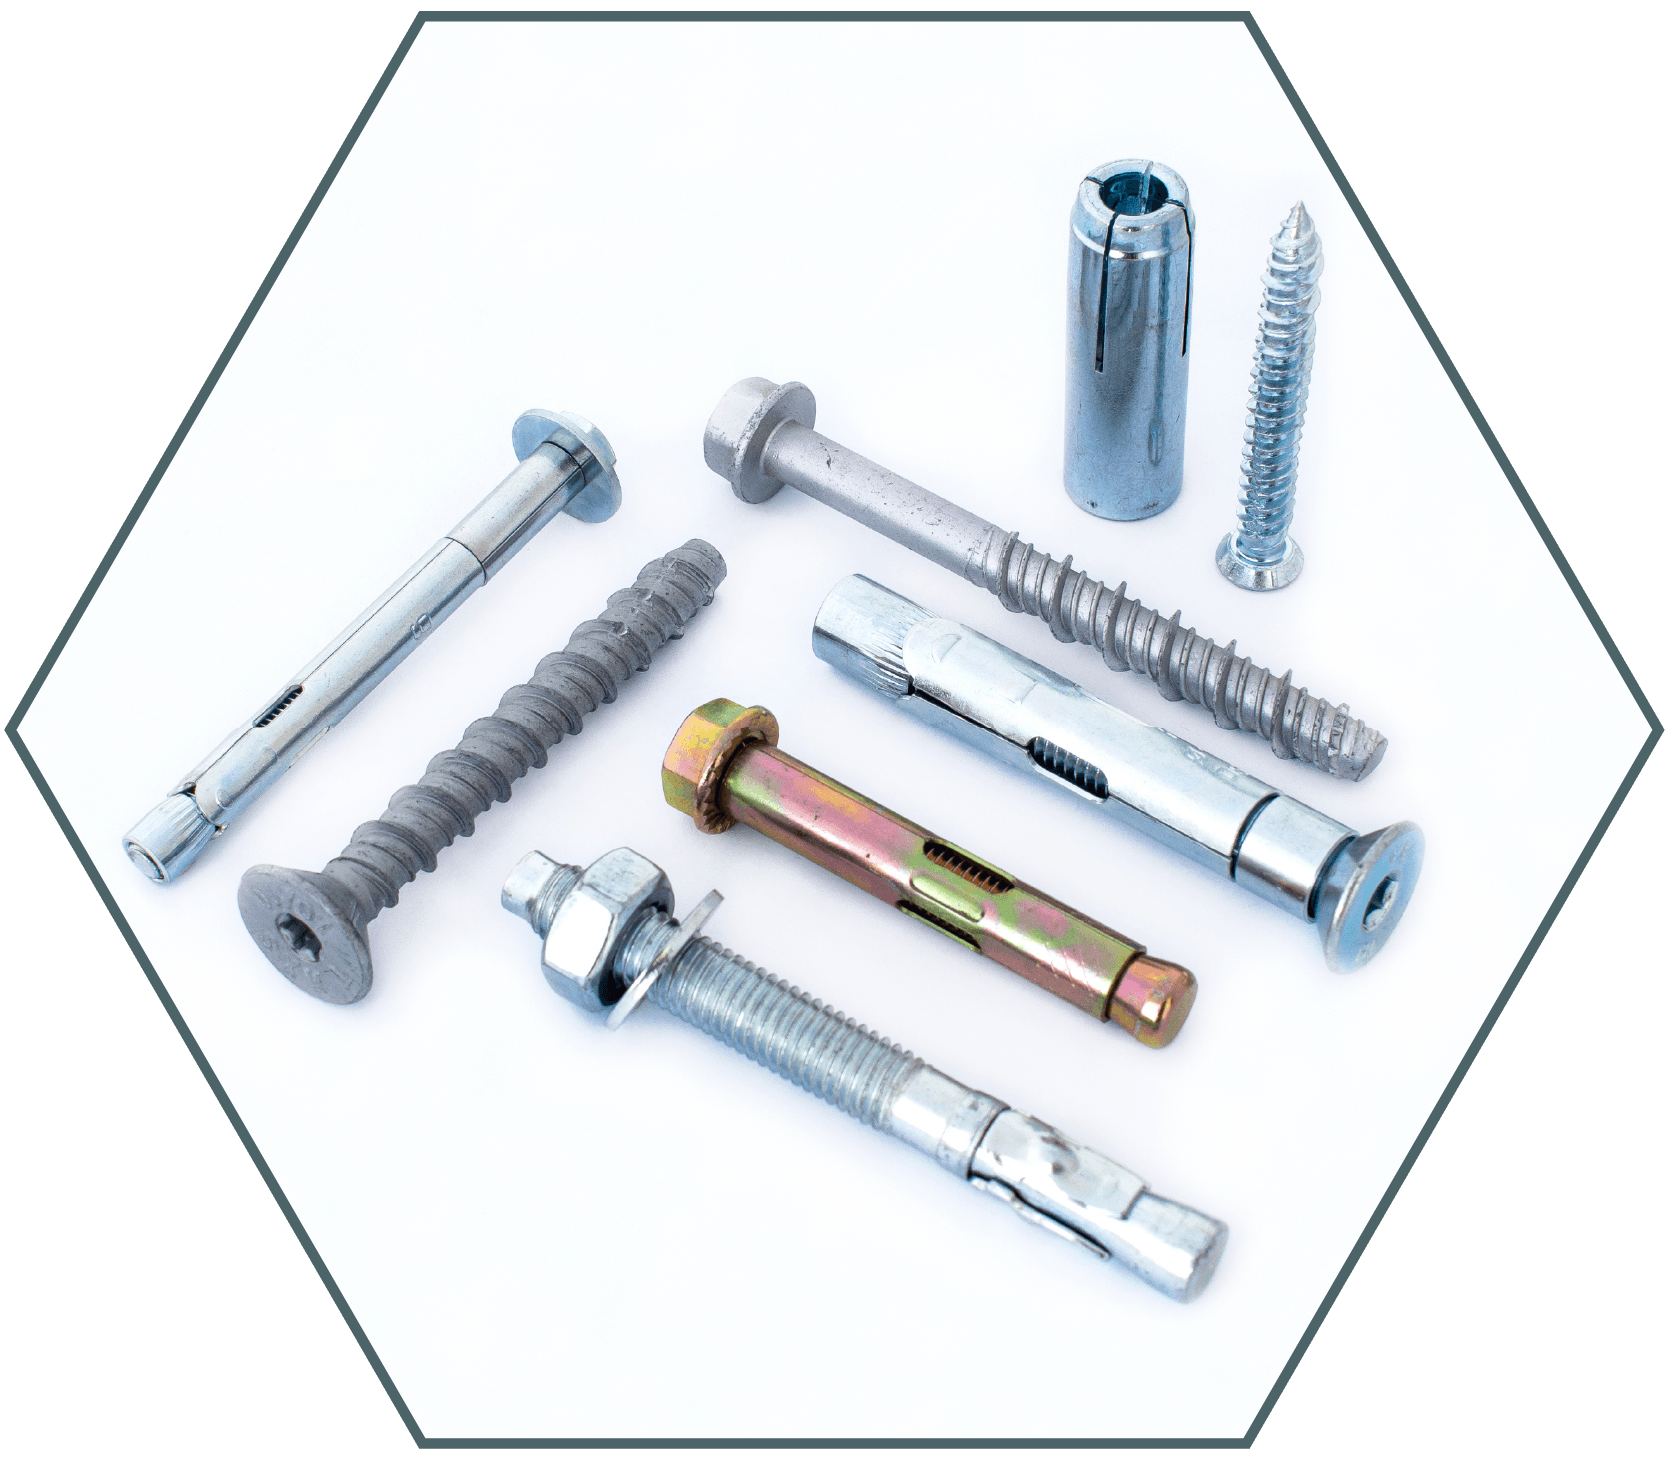 Fasteners specialists - Anchor screws and rawbolts